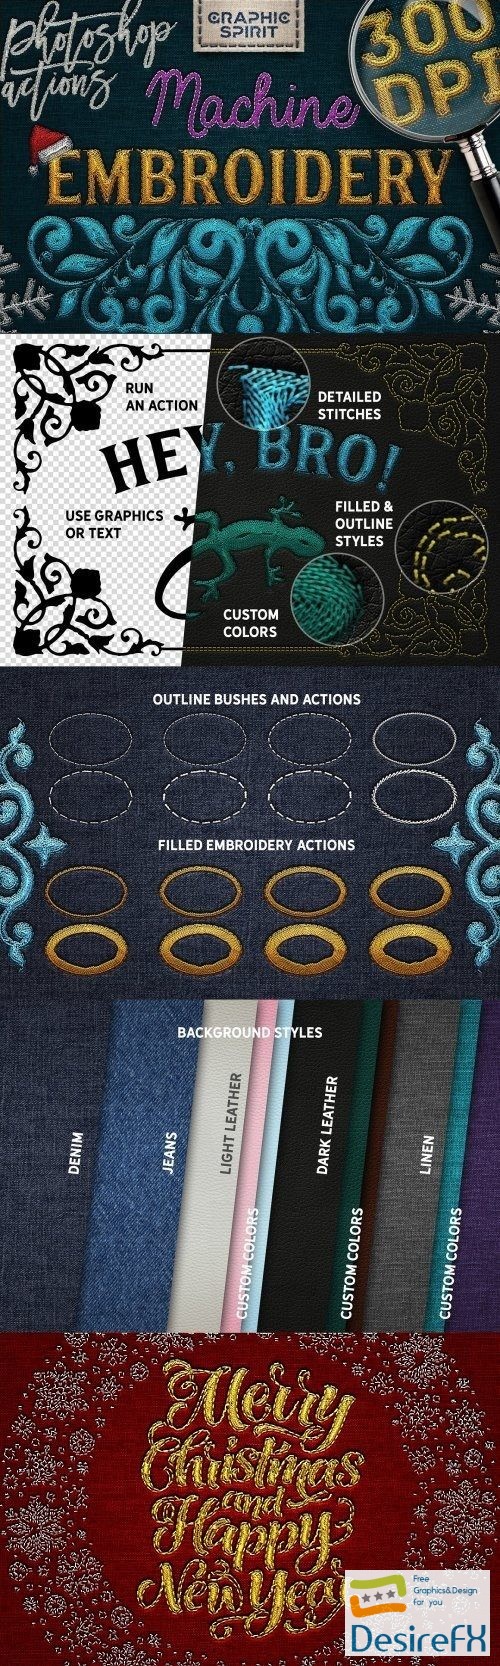 Machine Embroidery Photoshop Actions - 2167124